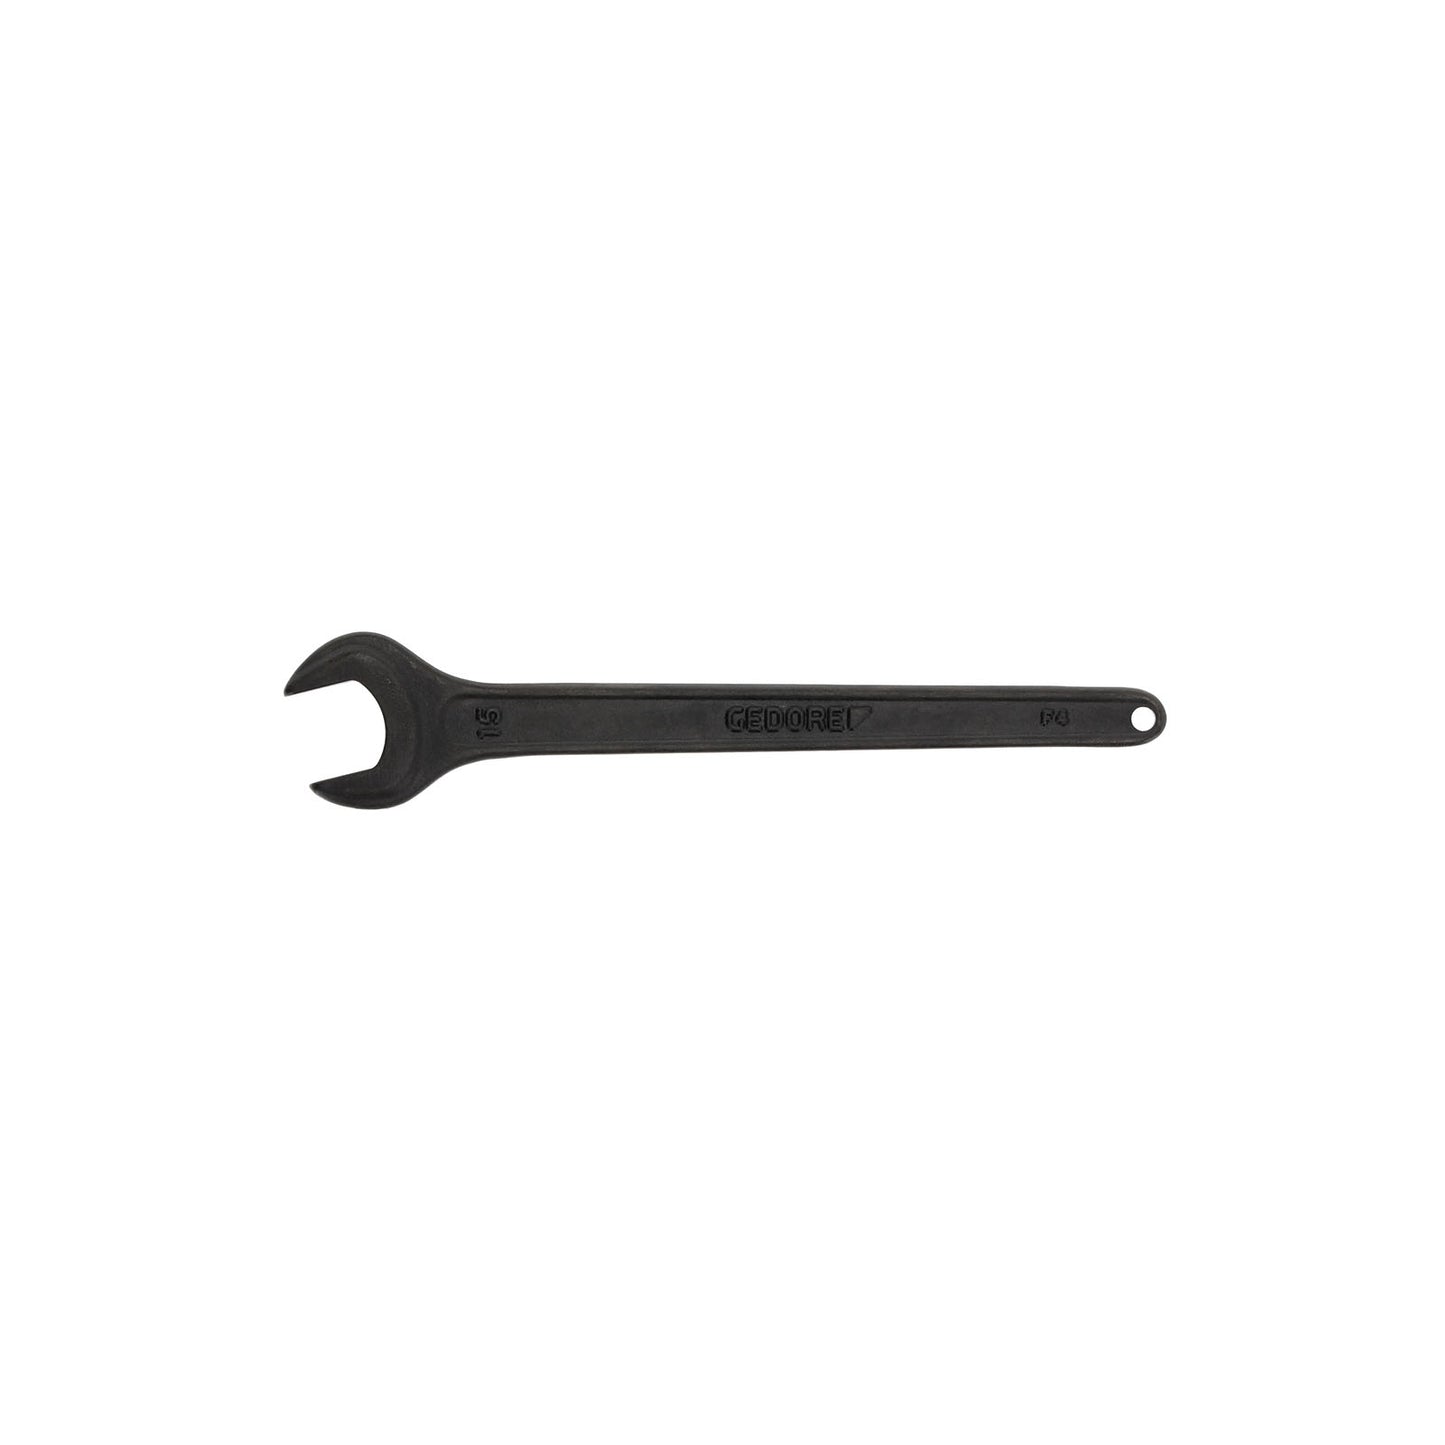 GEDORE 894 15 - 1 Open End Wrench, 15mm (6574680)